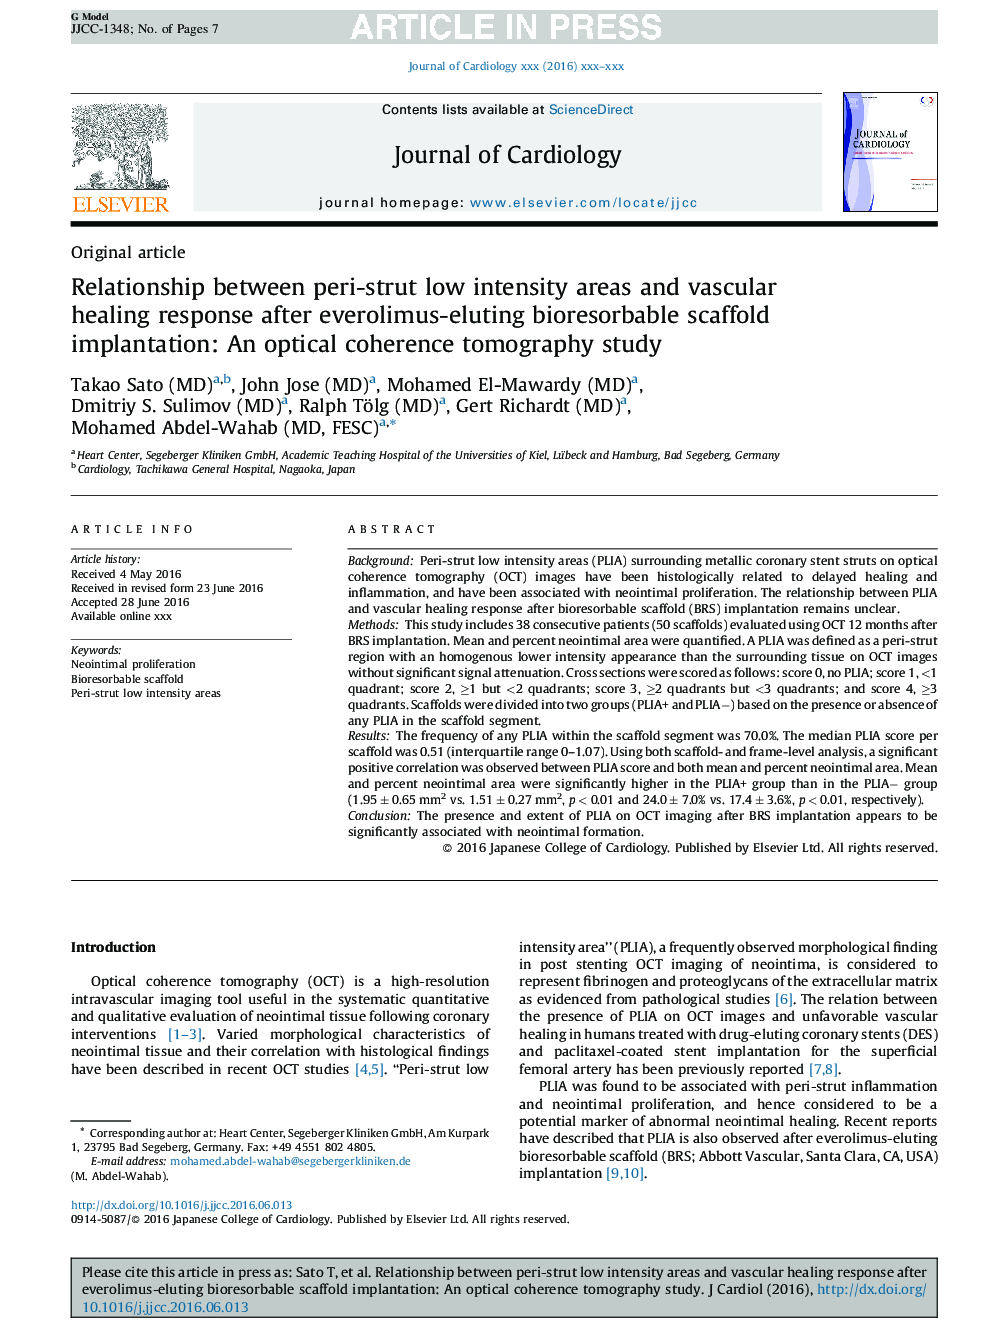 Relationship between peri-strut low intensity areas and vascular healing response after everolimus-eluting bioresorbable scaffold implantation: An optical coherence tomography study